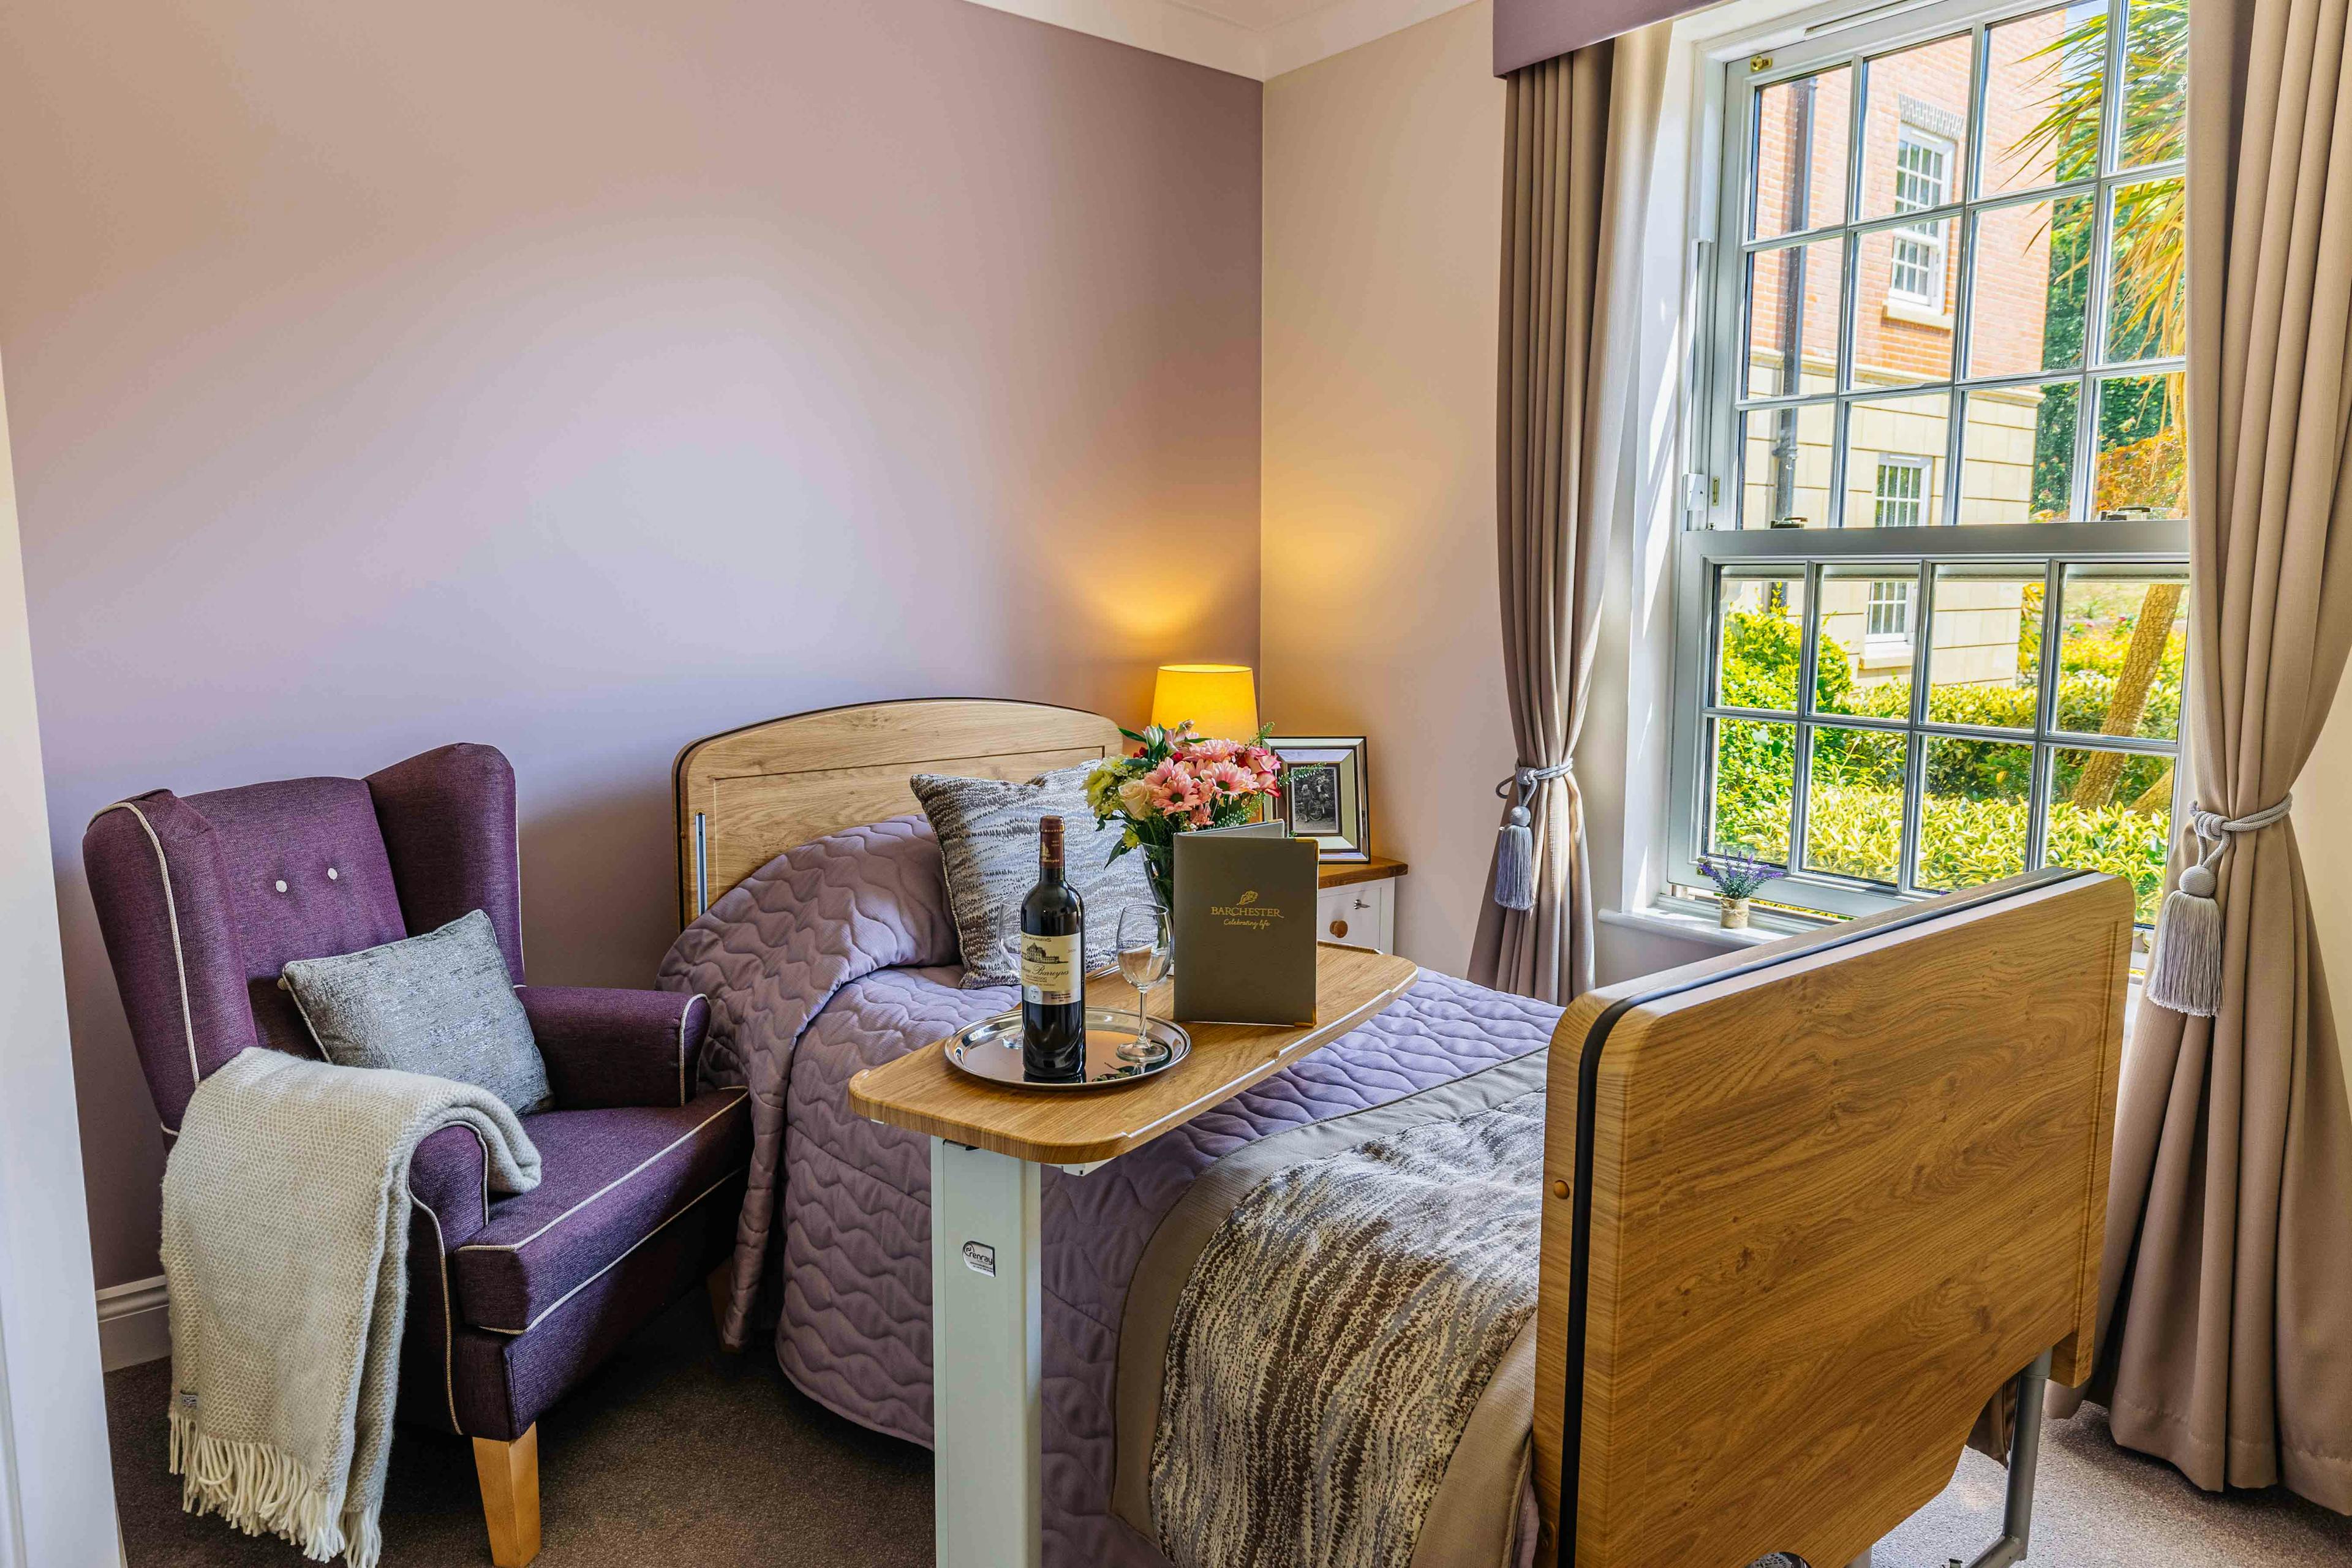 Bedroom at Worplesdon View Care Home in Guildford, Surrey